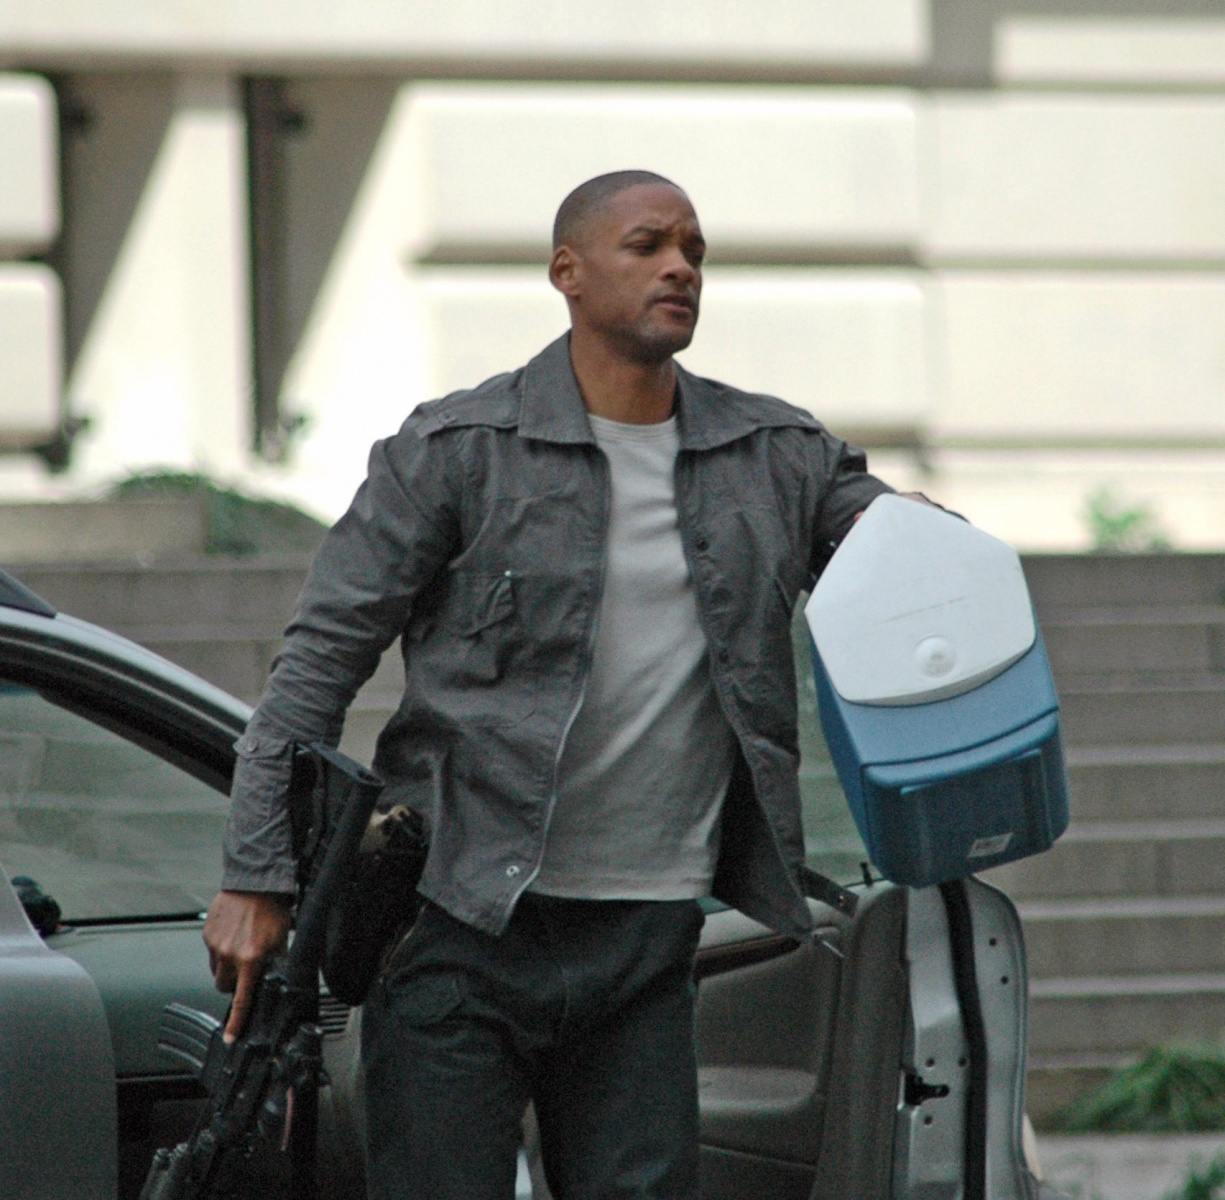 Will Smith on Location for "I Am Legend" in New York City - March 12, 2007